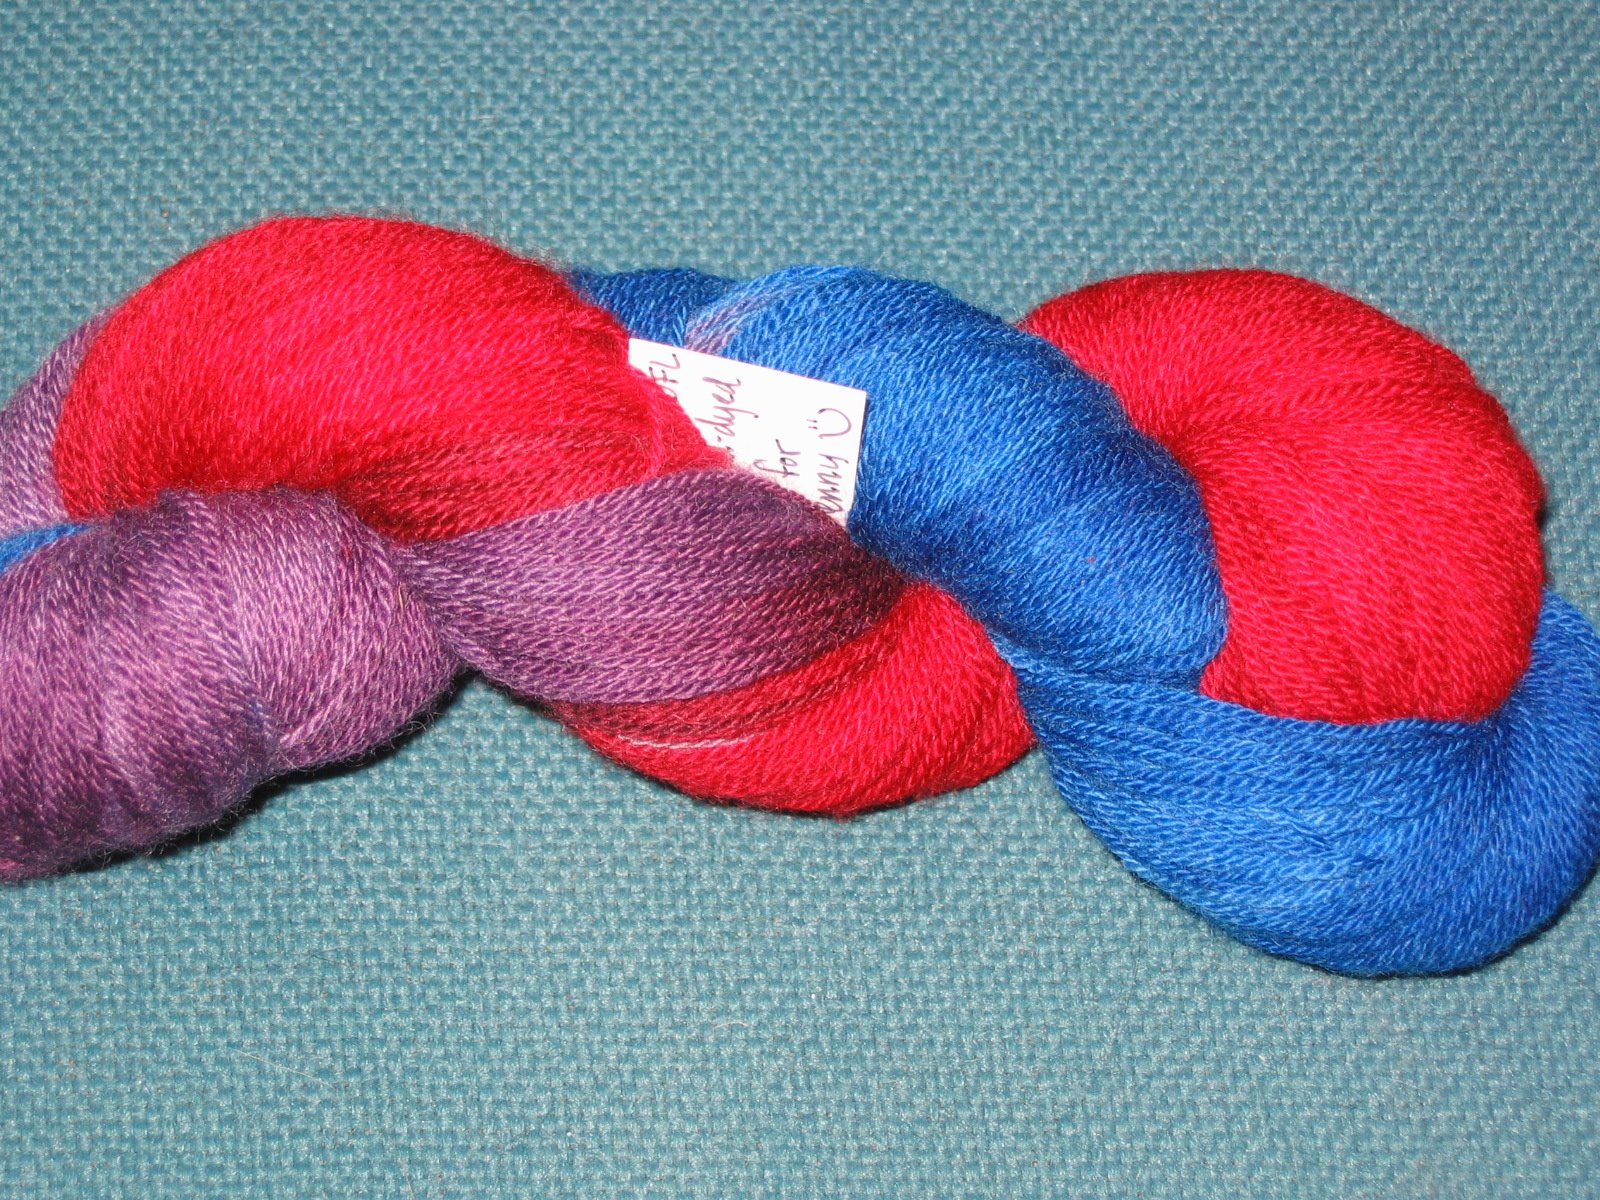 [Yarn+hand+dyed+for+me+by+Jan+in+the+Hand+Dyed+Yarn+Swap+3.JPG]